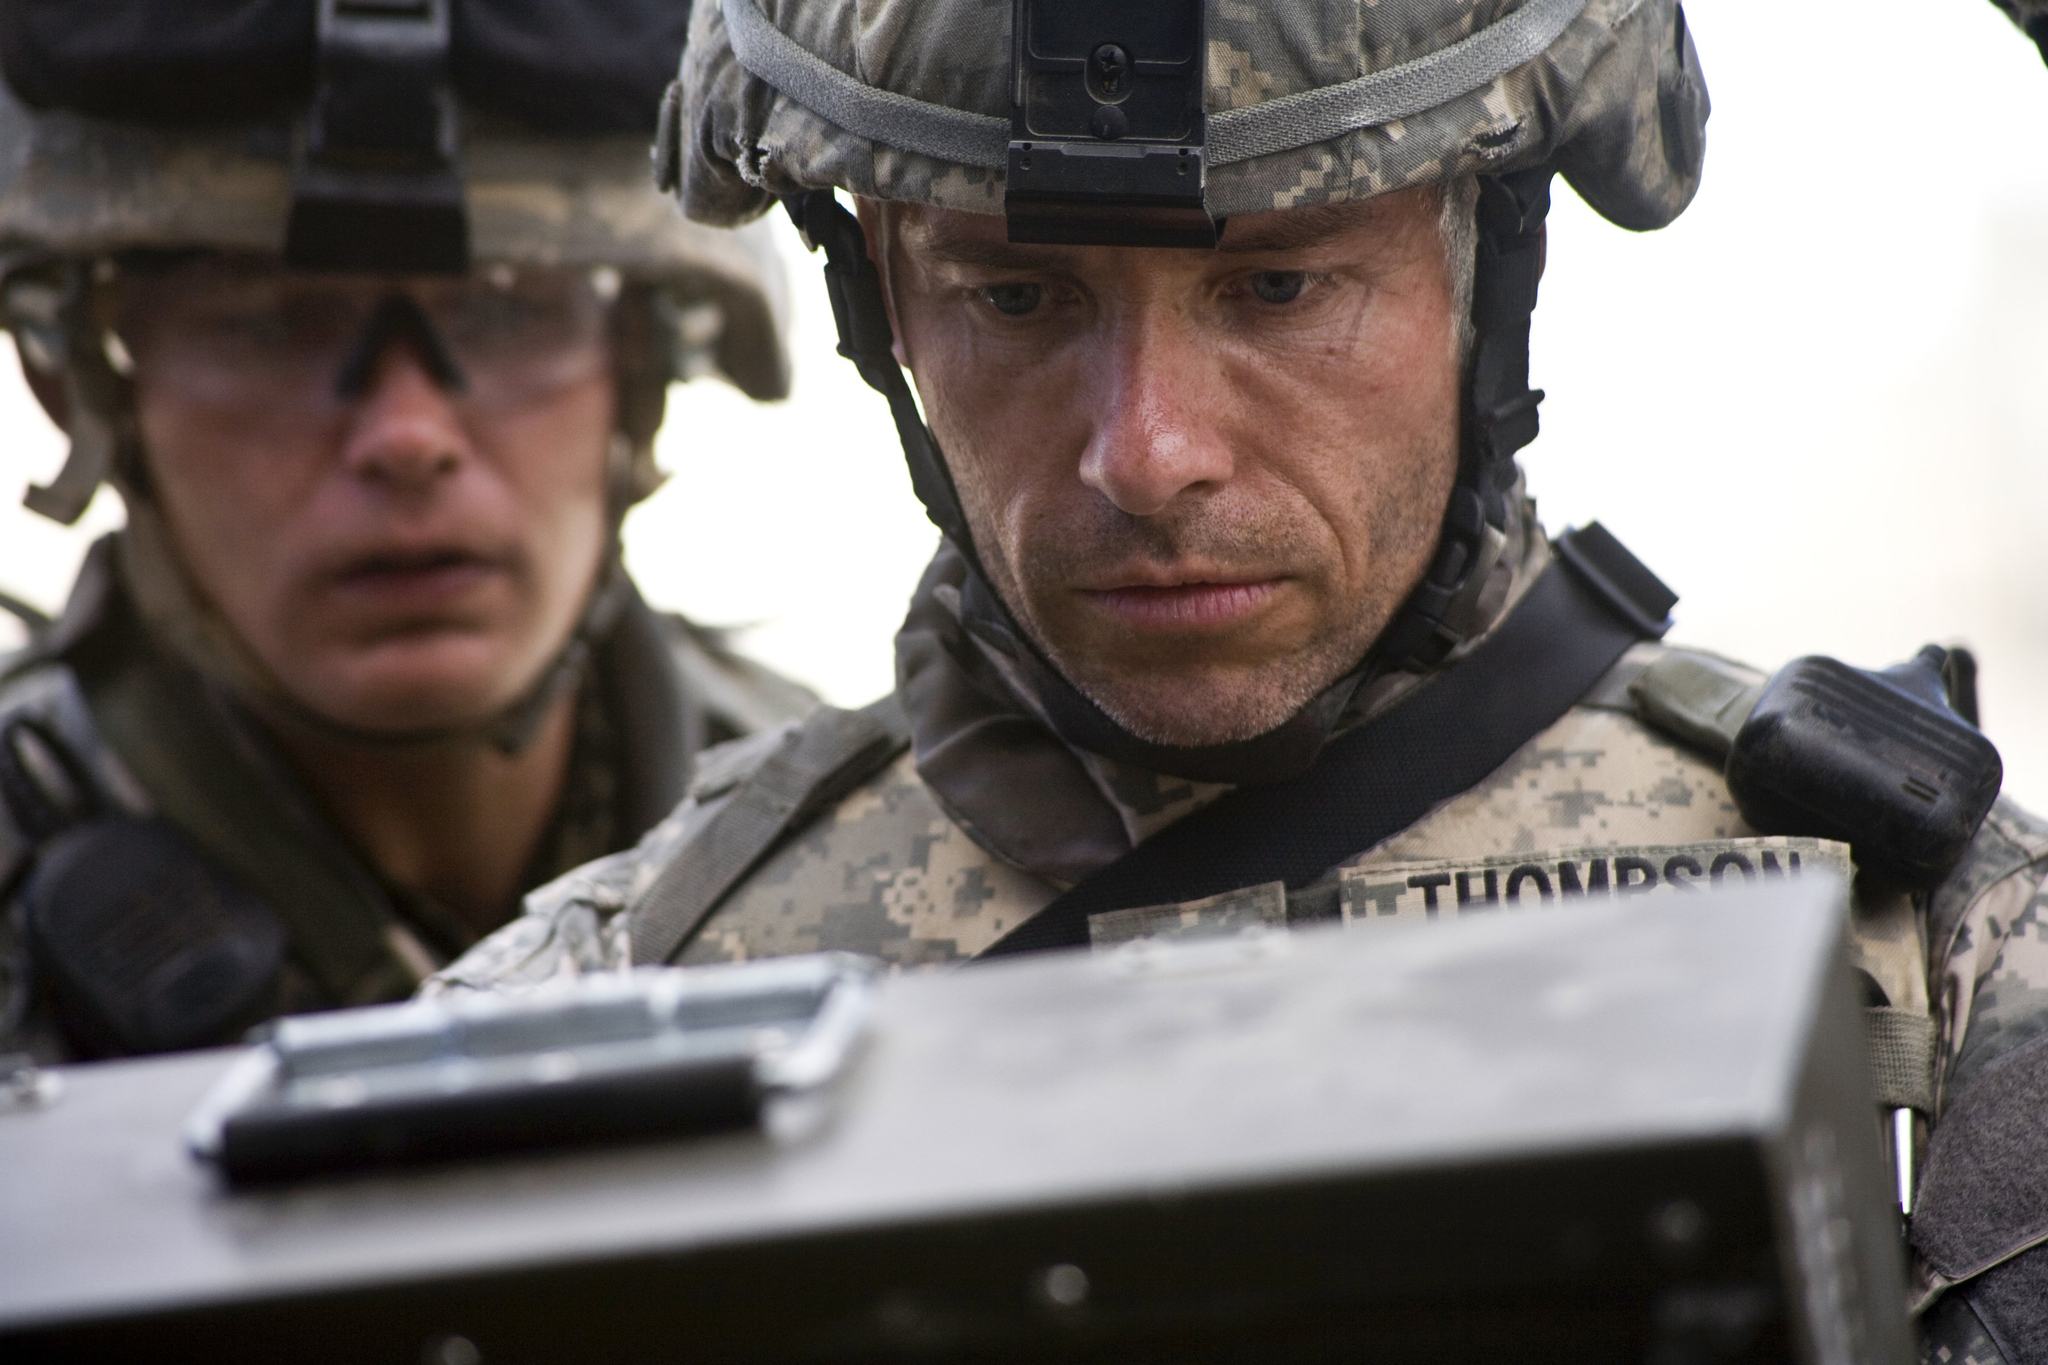 Still of Guy Pearce and Brian Geraghty in Isminuotoju burys (2008)